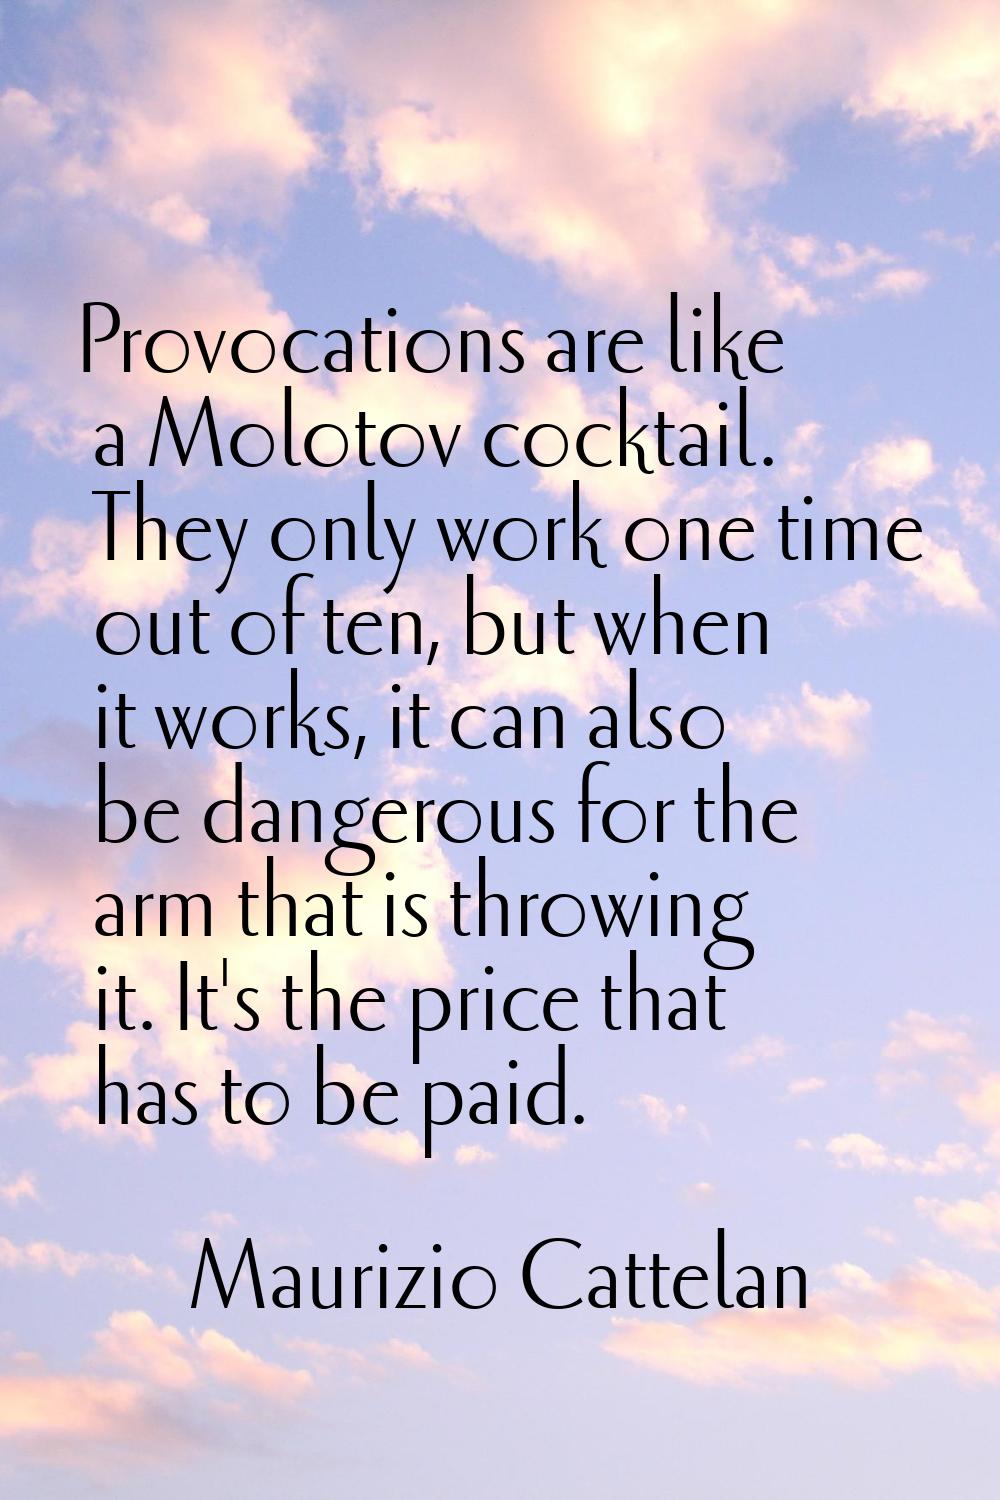 Provocations are like a Molotov cocktail. They only work one time out of ten, but when it works, it